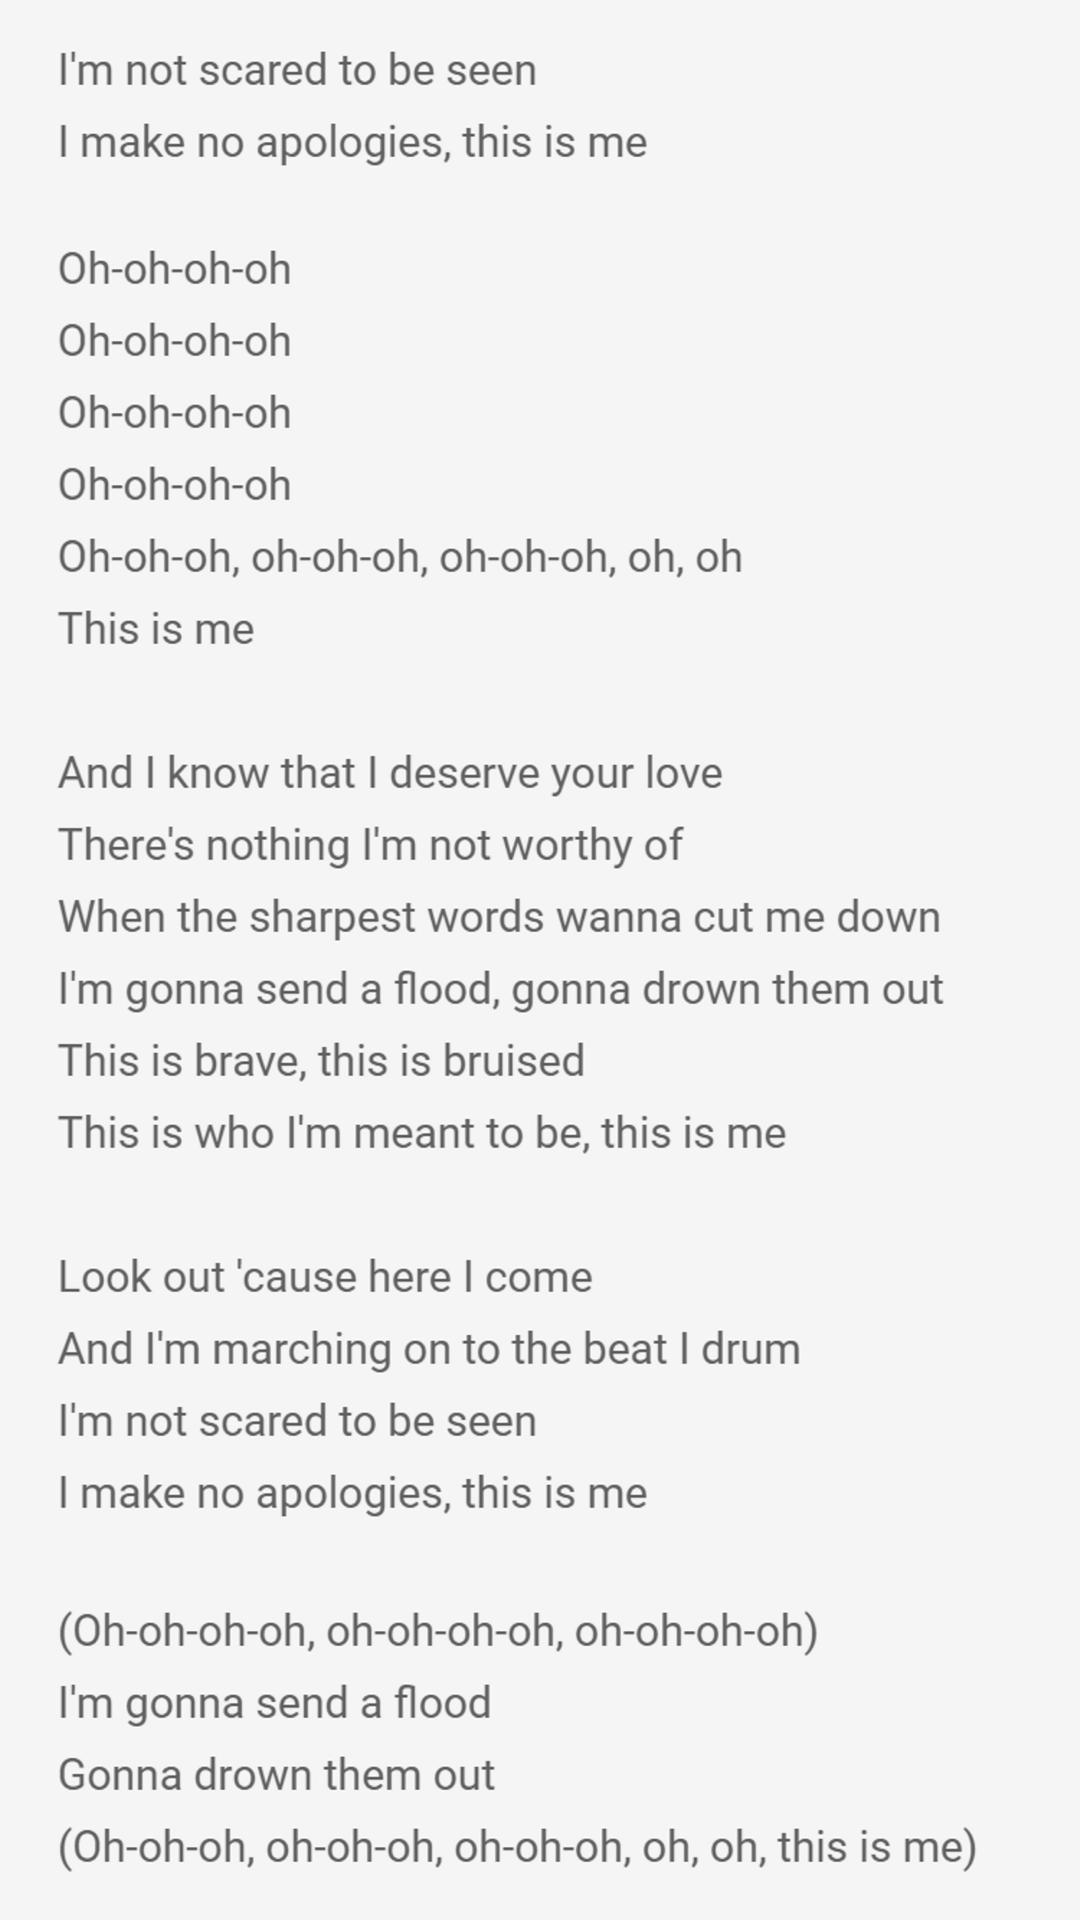 This Is Me - Just Lyrics - The Greatest Showman for Android - APK Download